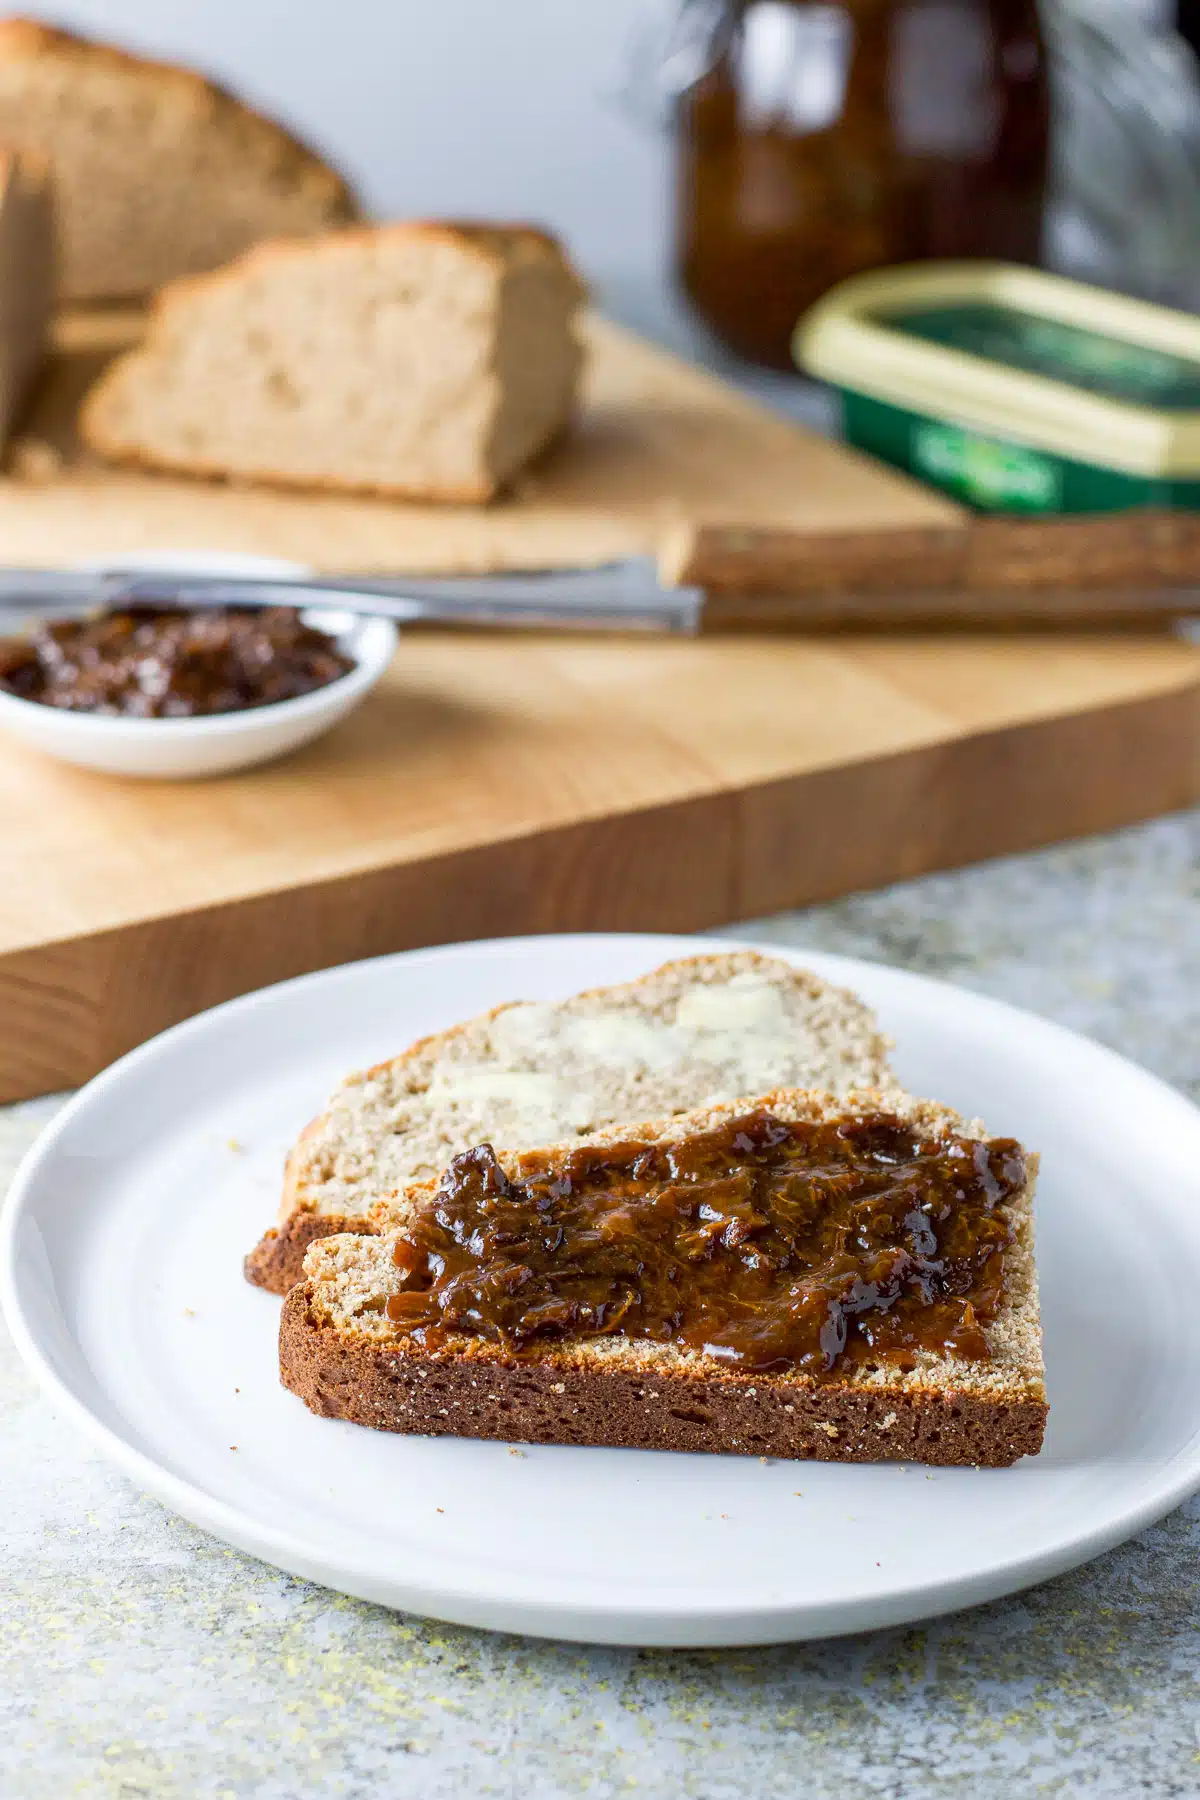 Two pieces of bread with butter and prune spread on it on a white plate with more bread in the back